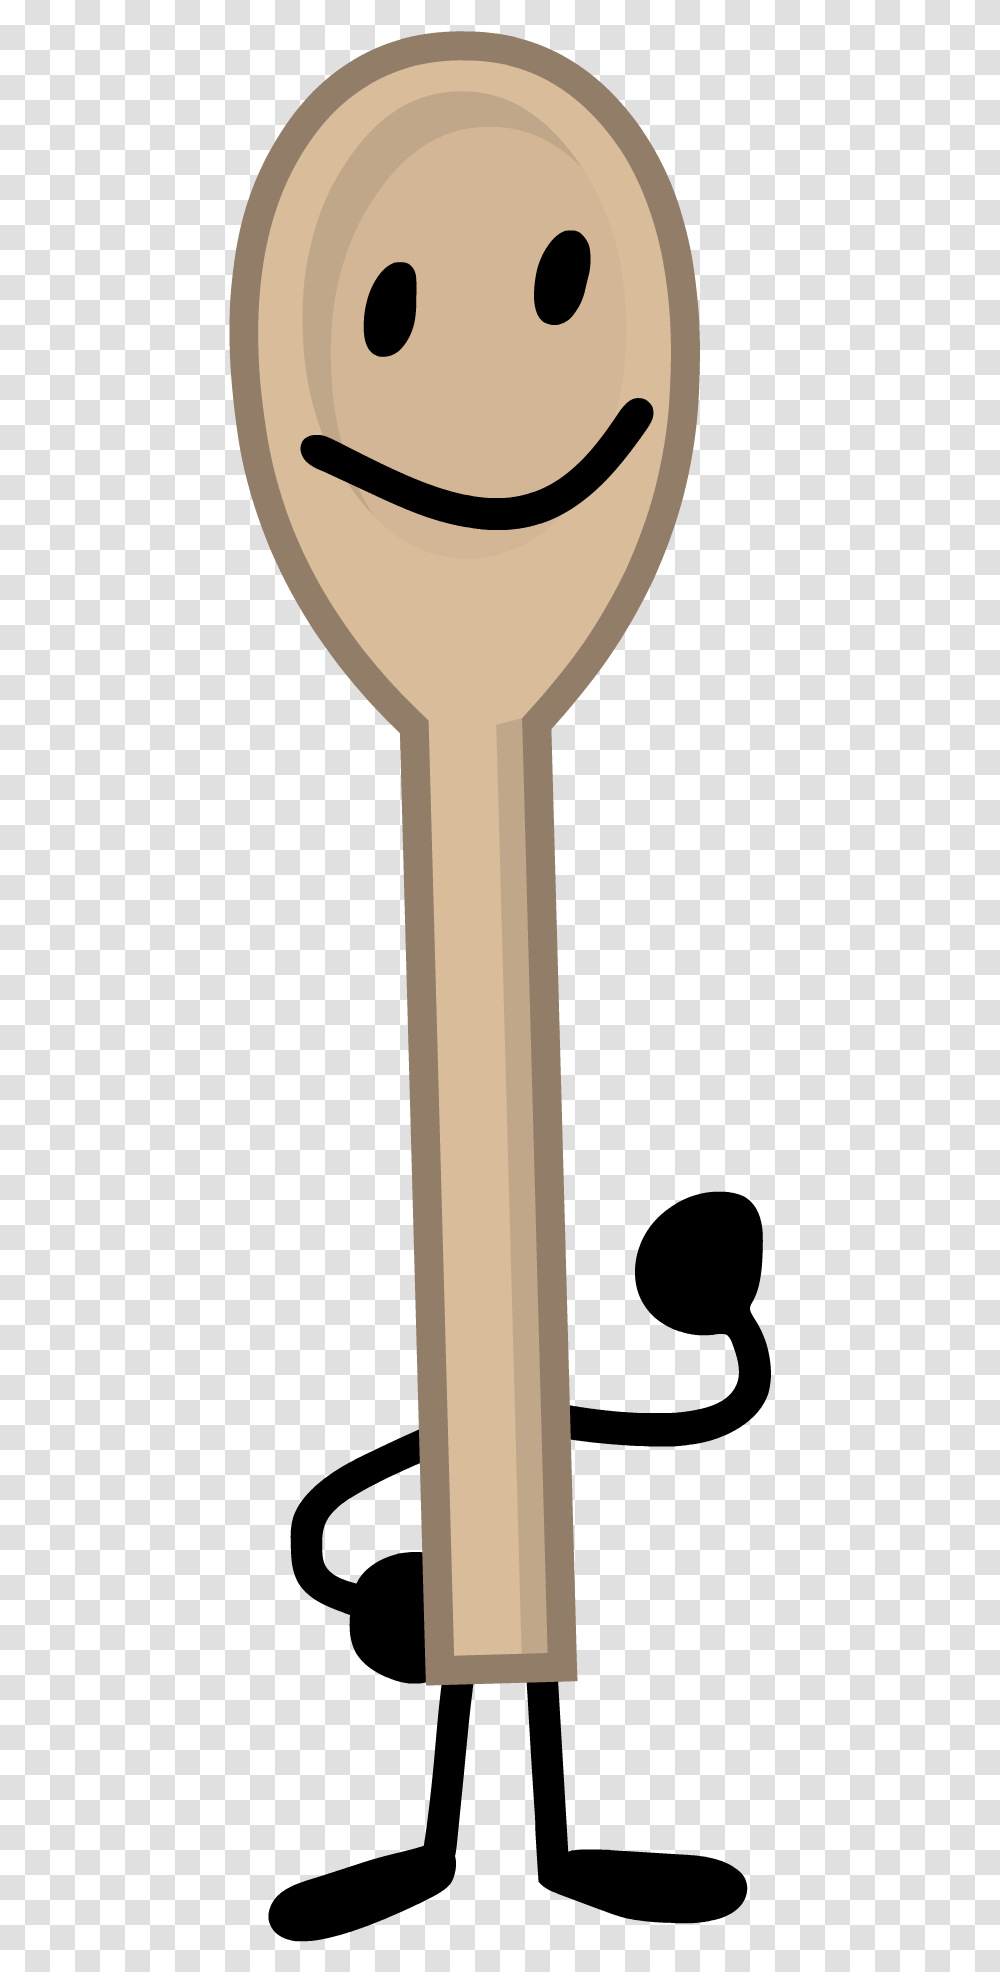 Object Filler Wiki Object Filler Again Wooden Spoon, Key, Cutlery Transparent Png